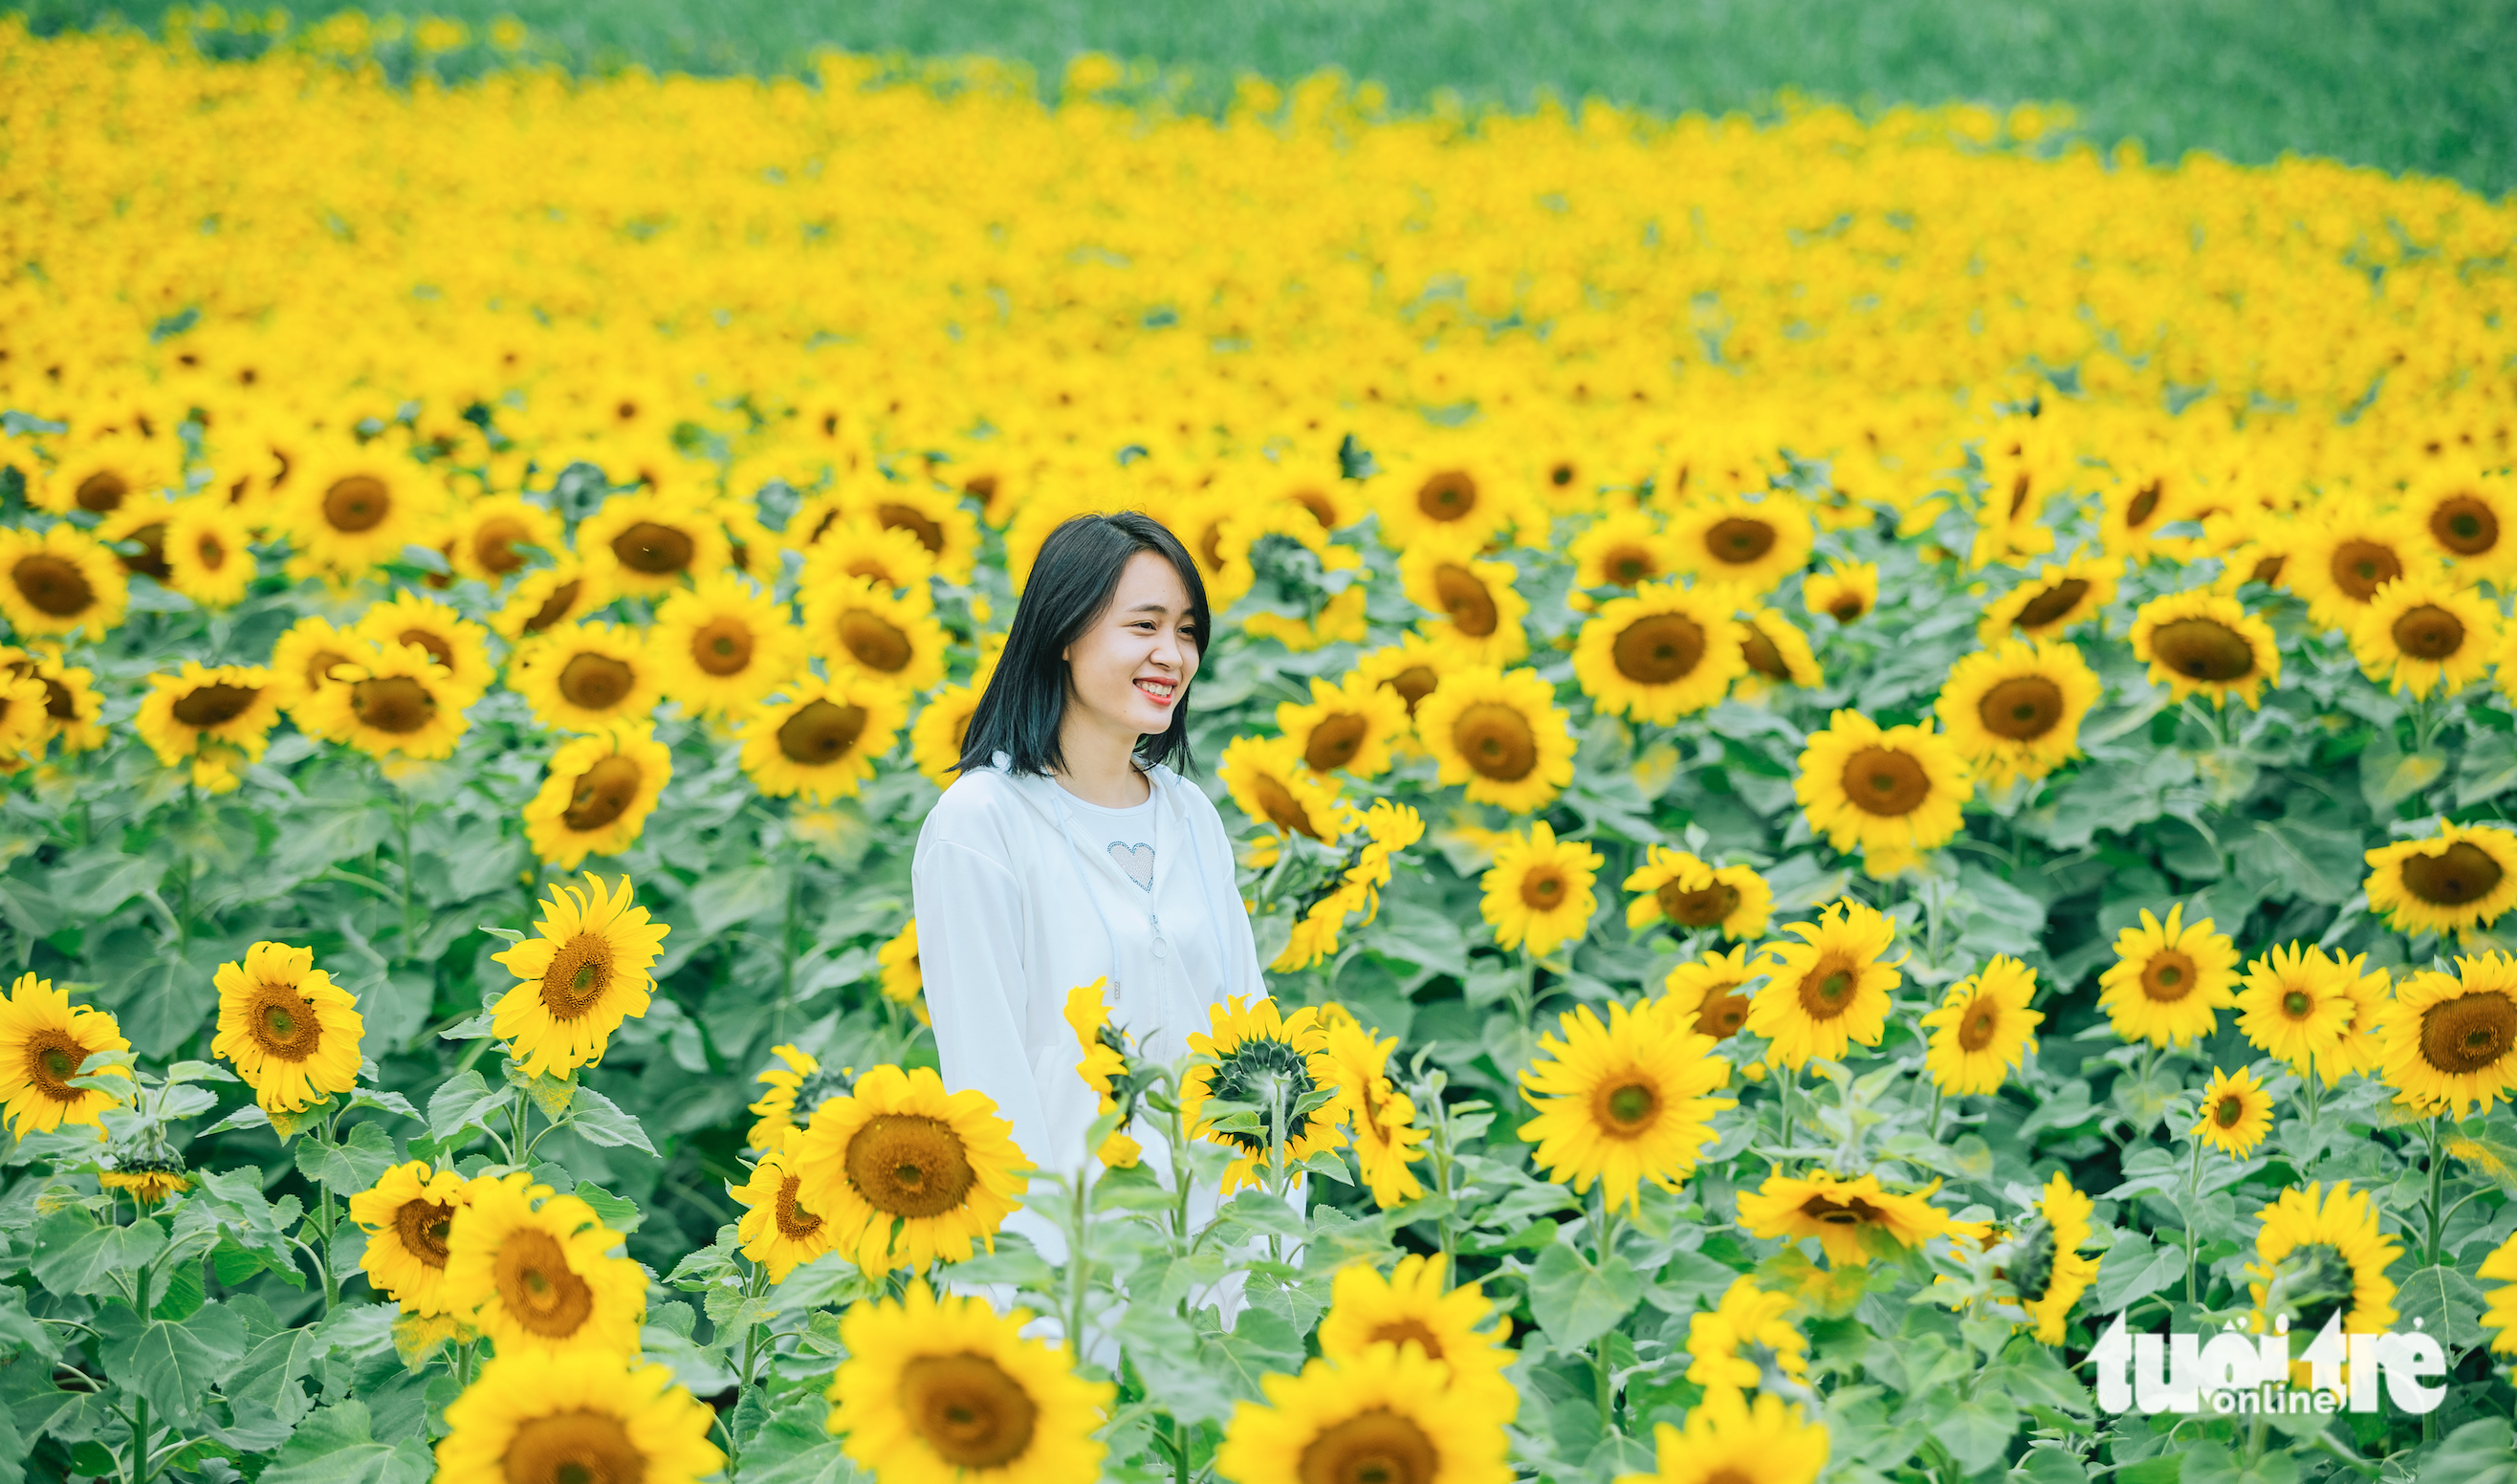 A woman poses with sunflowers in Nghe An Province, Vietnam, January 2, 2022. Photo: Rang Dong / Tuoi Tre